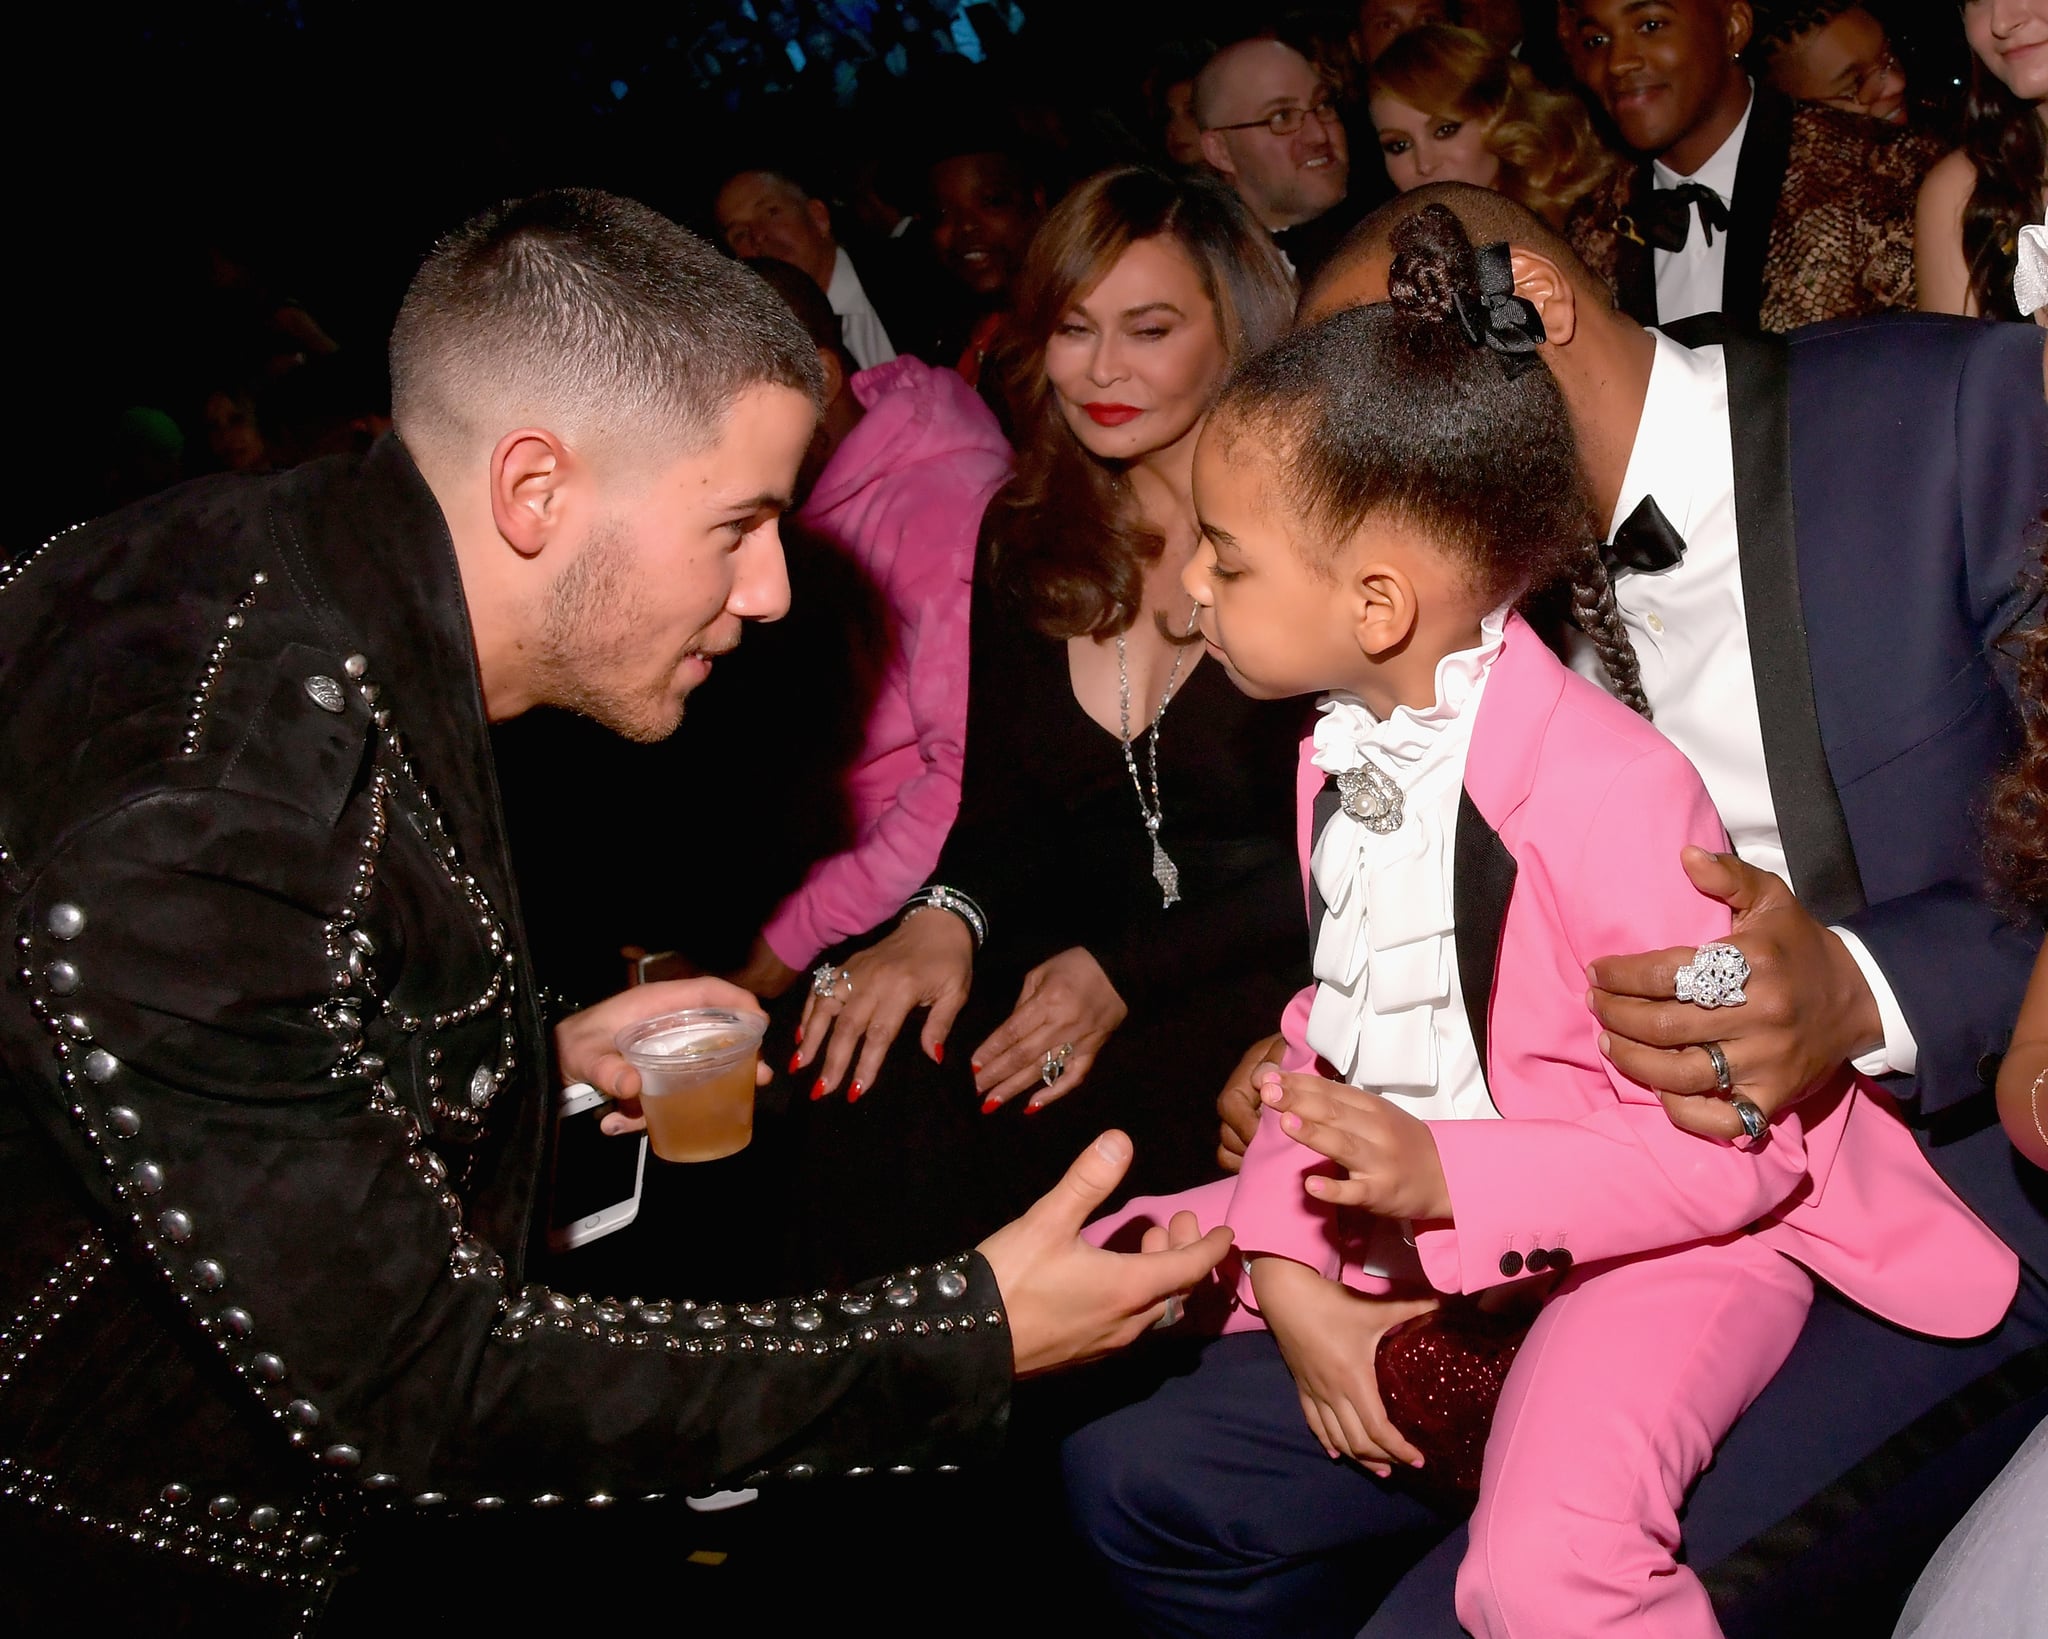 Nick Jonas reached out for a handshake from Blue Ivy Carter at the 2017 show.